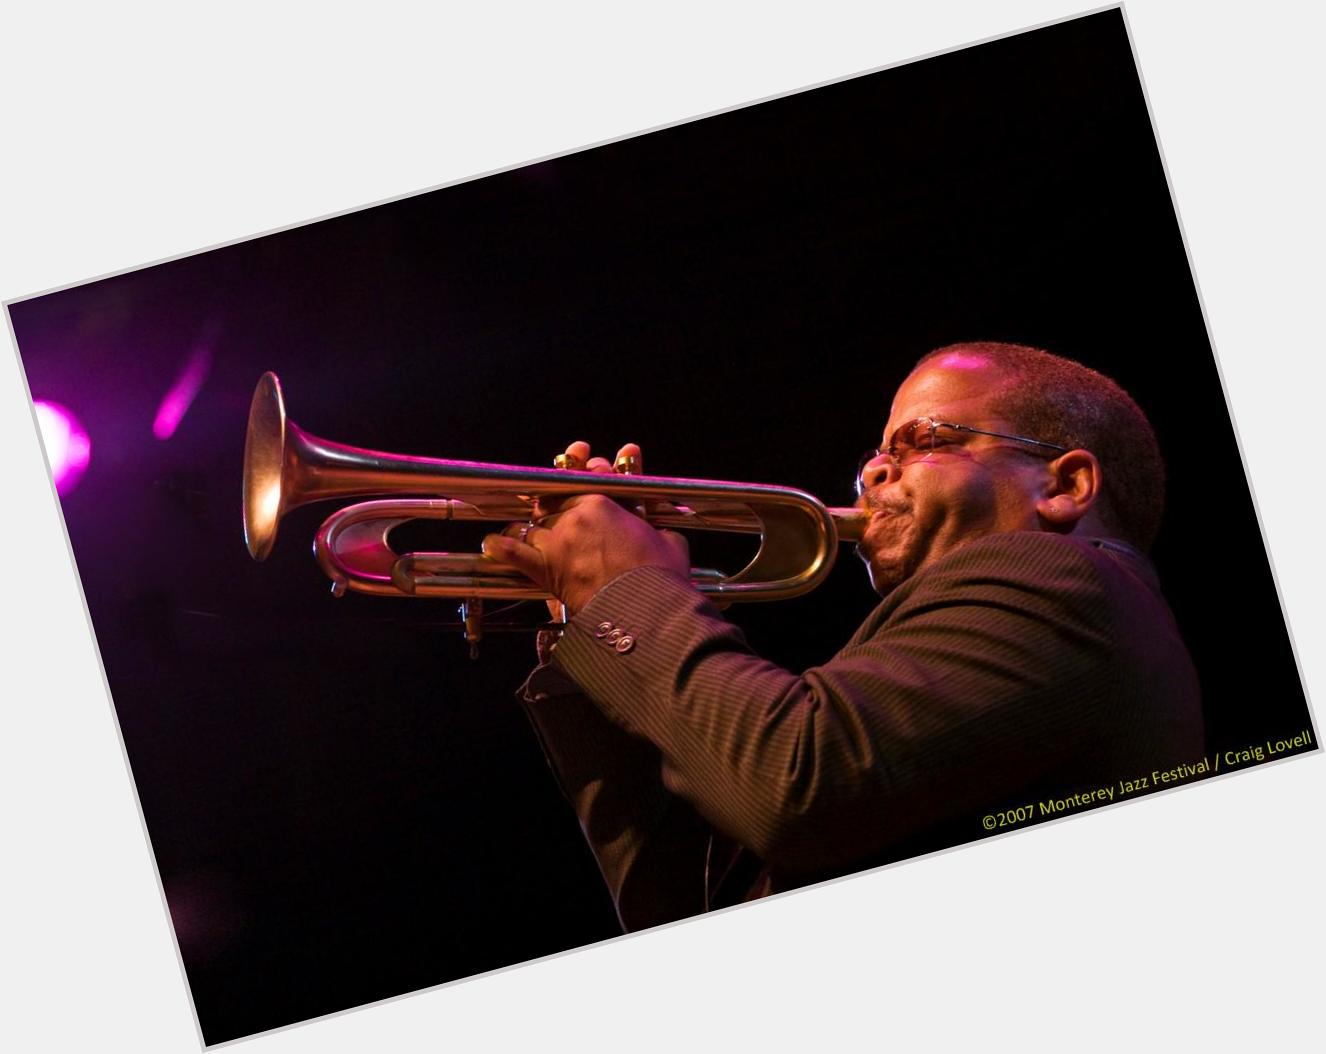 Happy Birthday wishes today (3.13) to Terence Blanchard. Image: 2007 